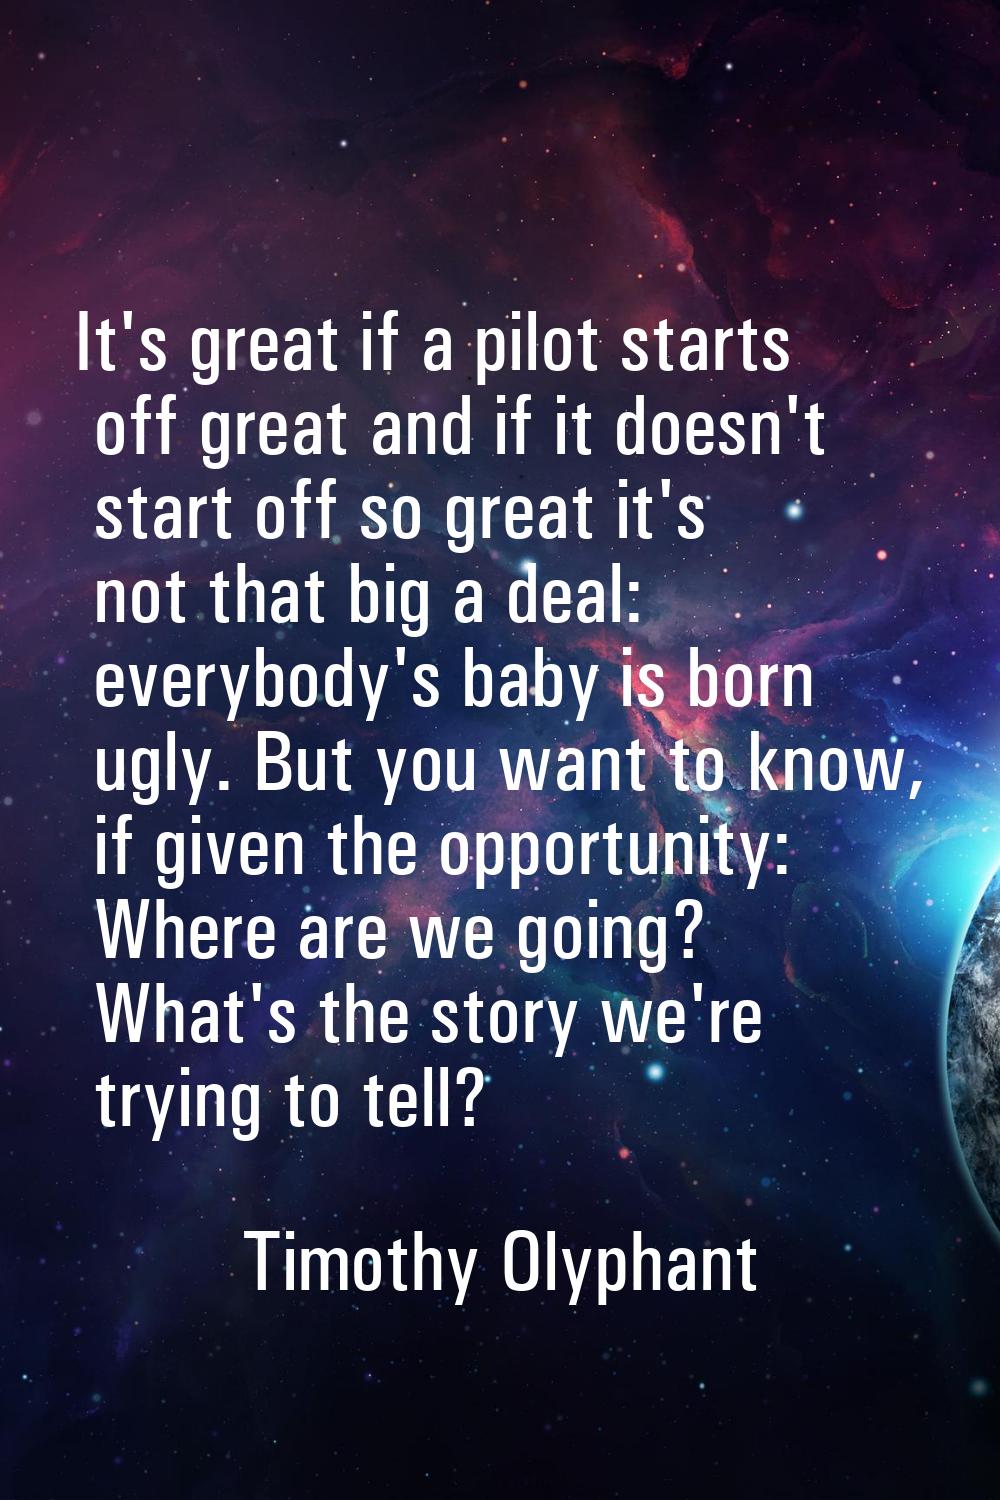 It's great if a pilot starts off great and if it doesn't start off so great it's not that big a dea